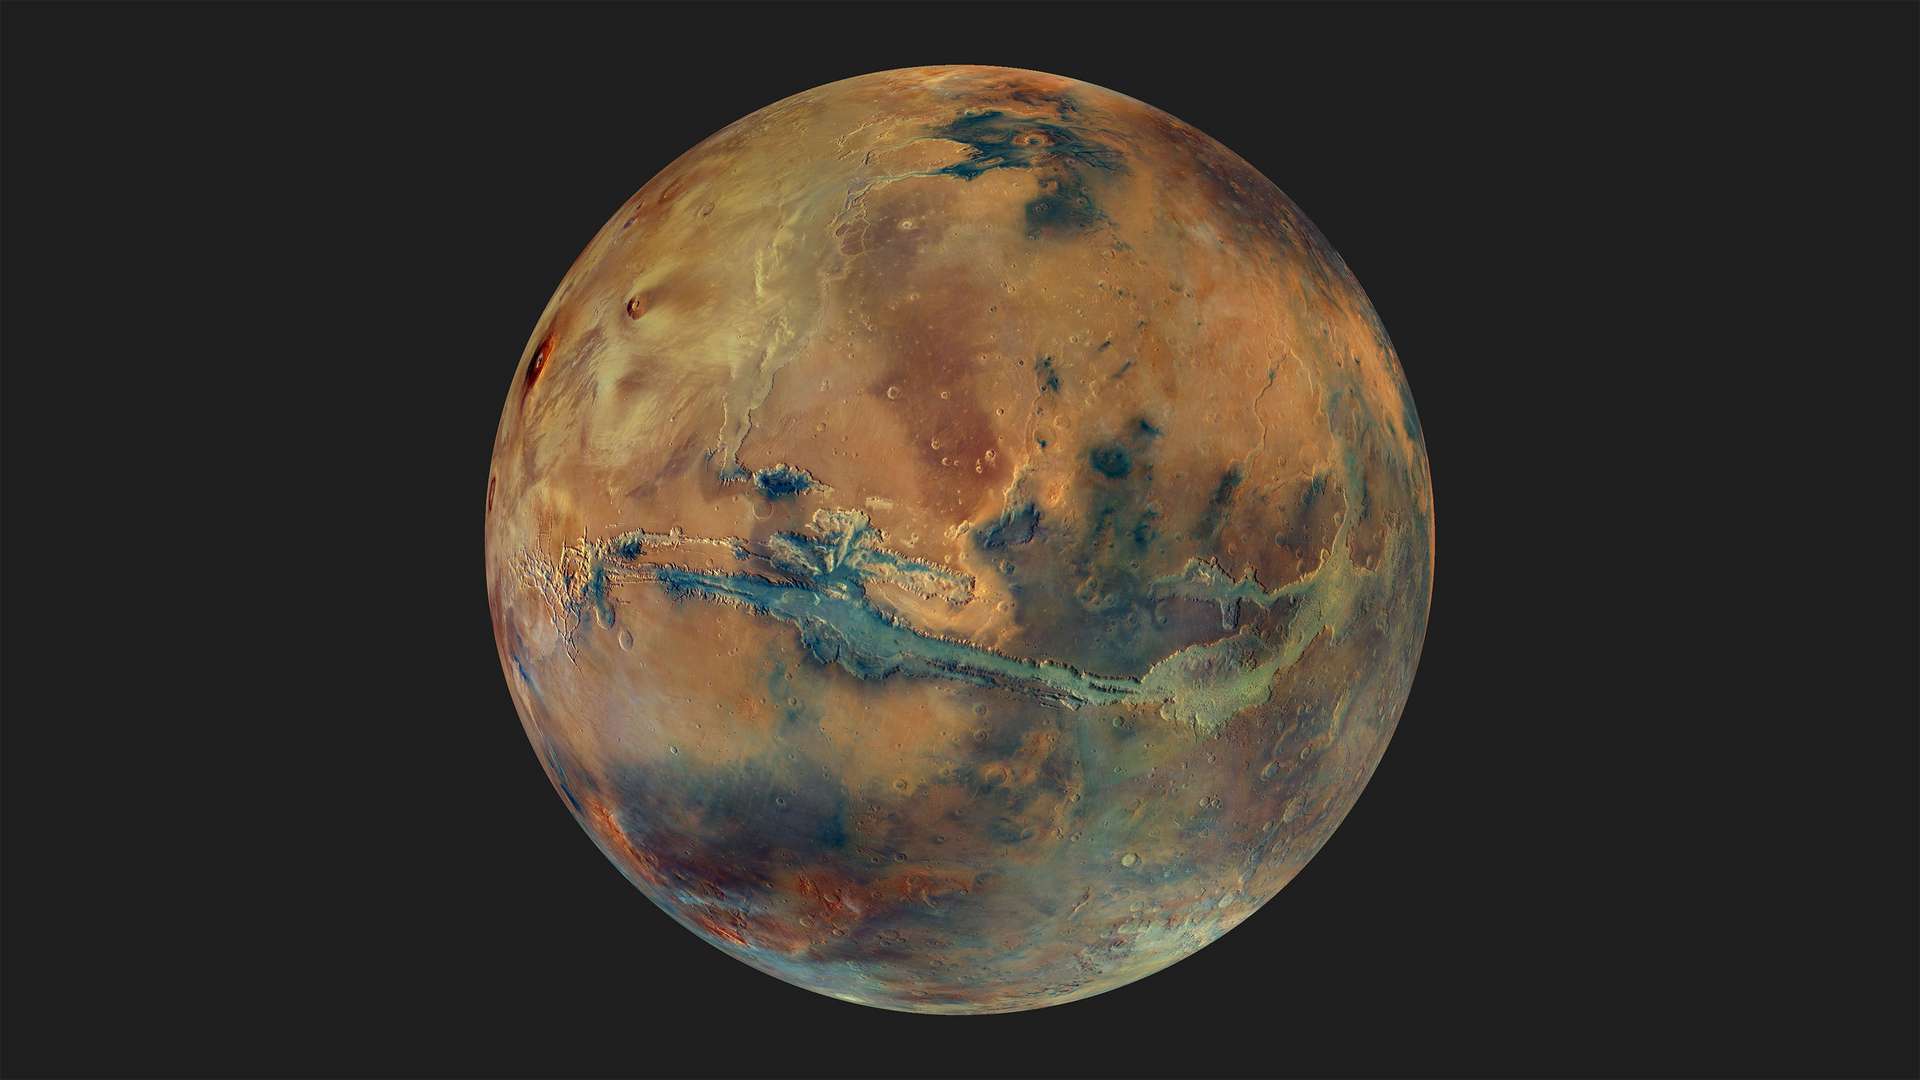 Mars will hide an unknown liquid layer between its core and mantle